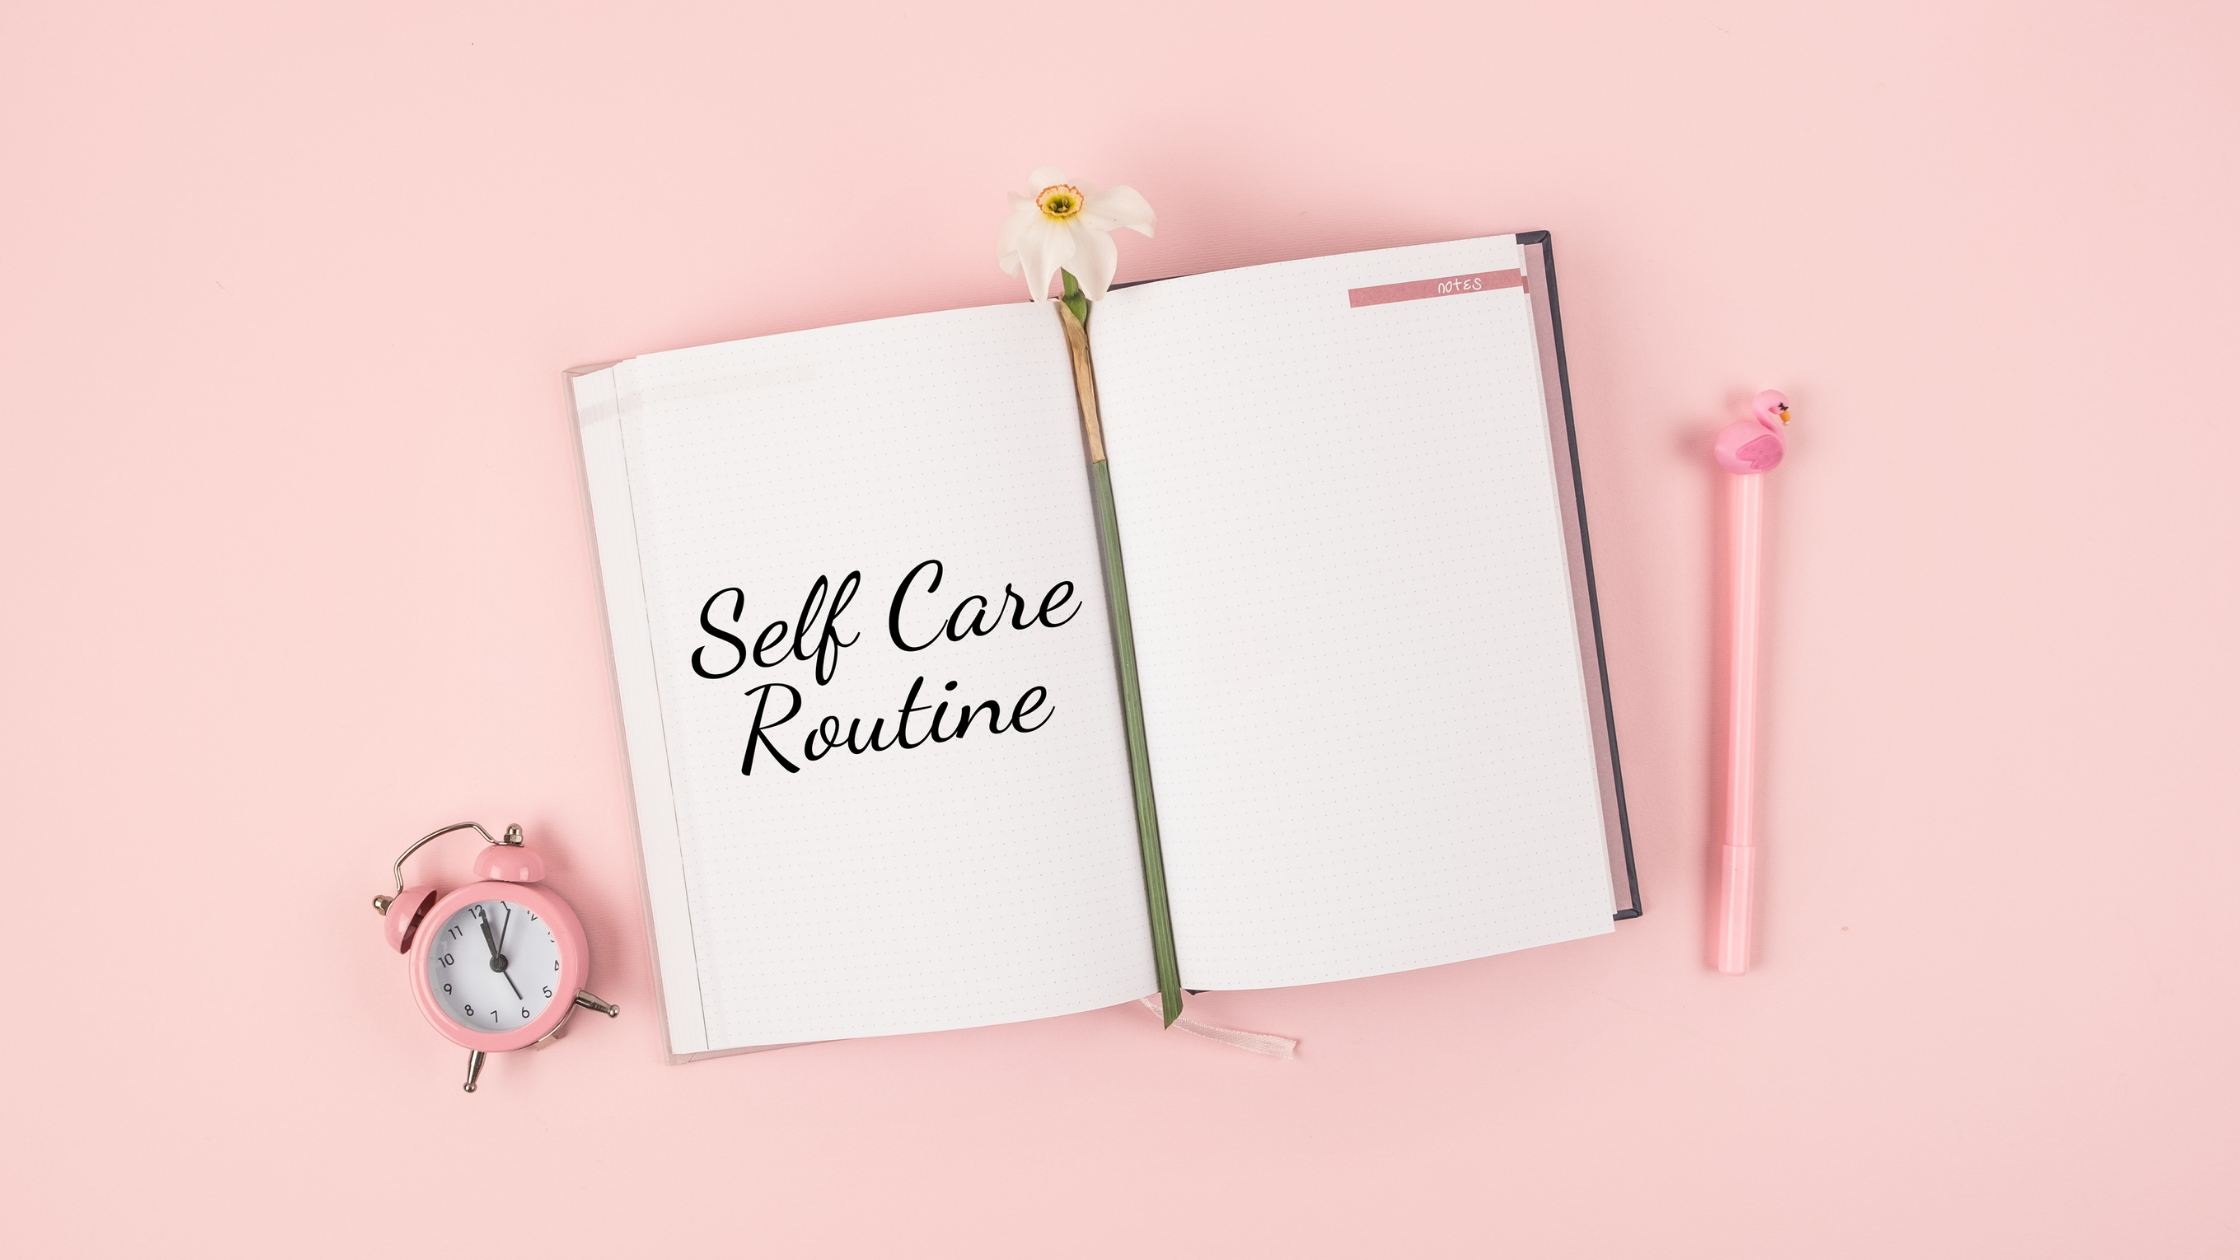 self-care tips from ignite for post-finals